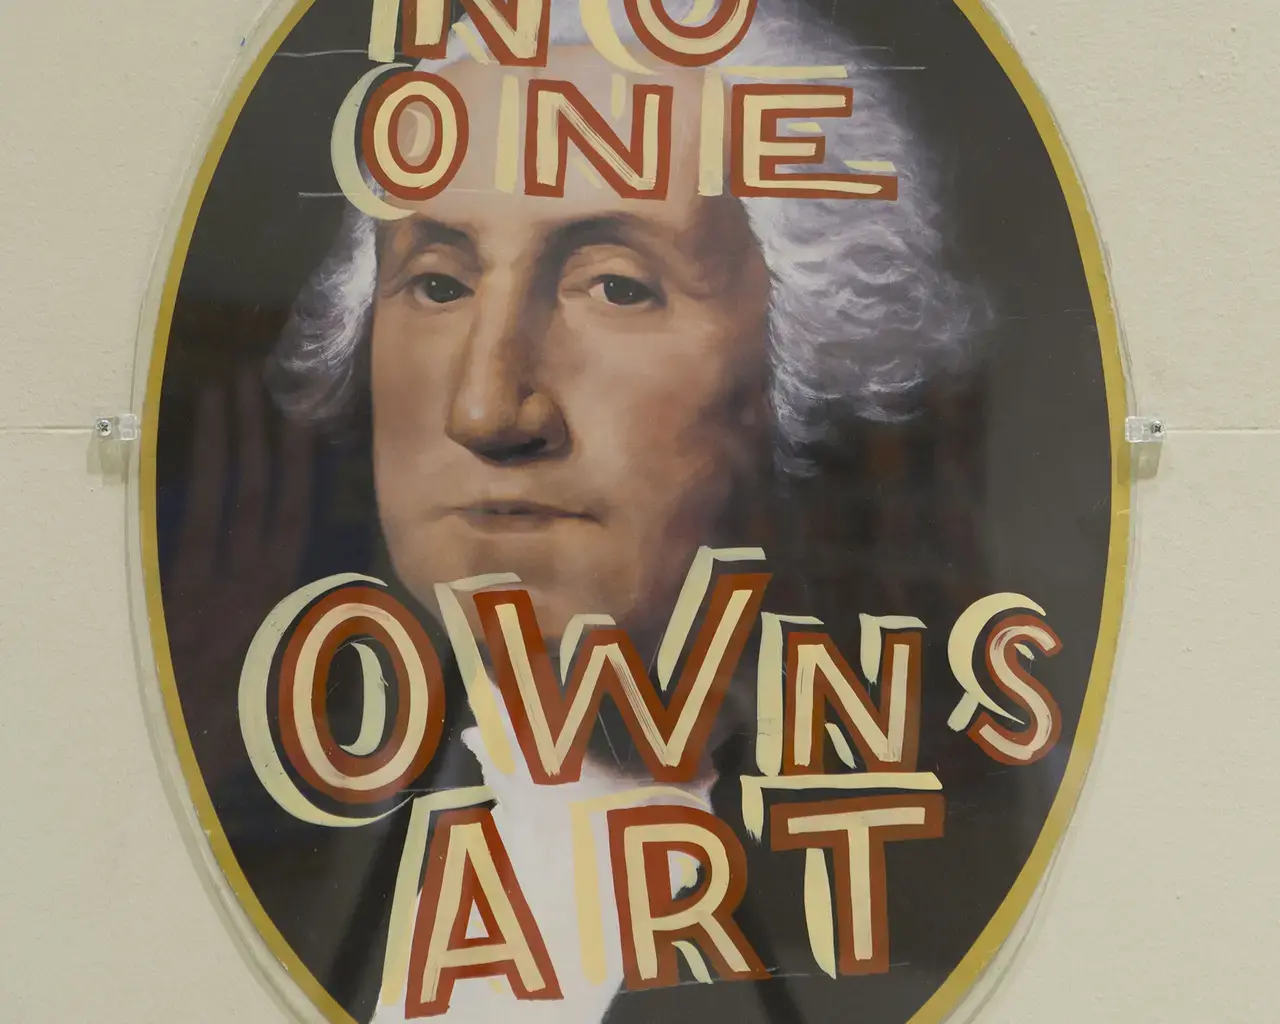 Untitled work by Bob and Roberta Smith, installed as part of Framing Fraktur at the Free Library of Philadelphia. Courtesy of the Free Library of Philadelphia.